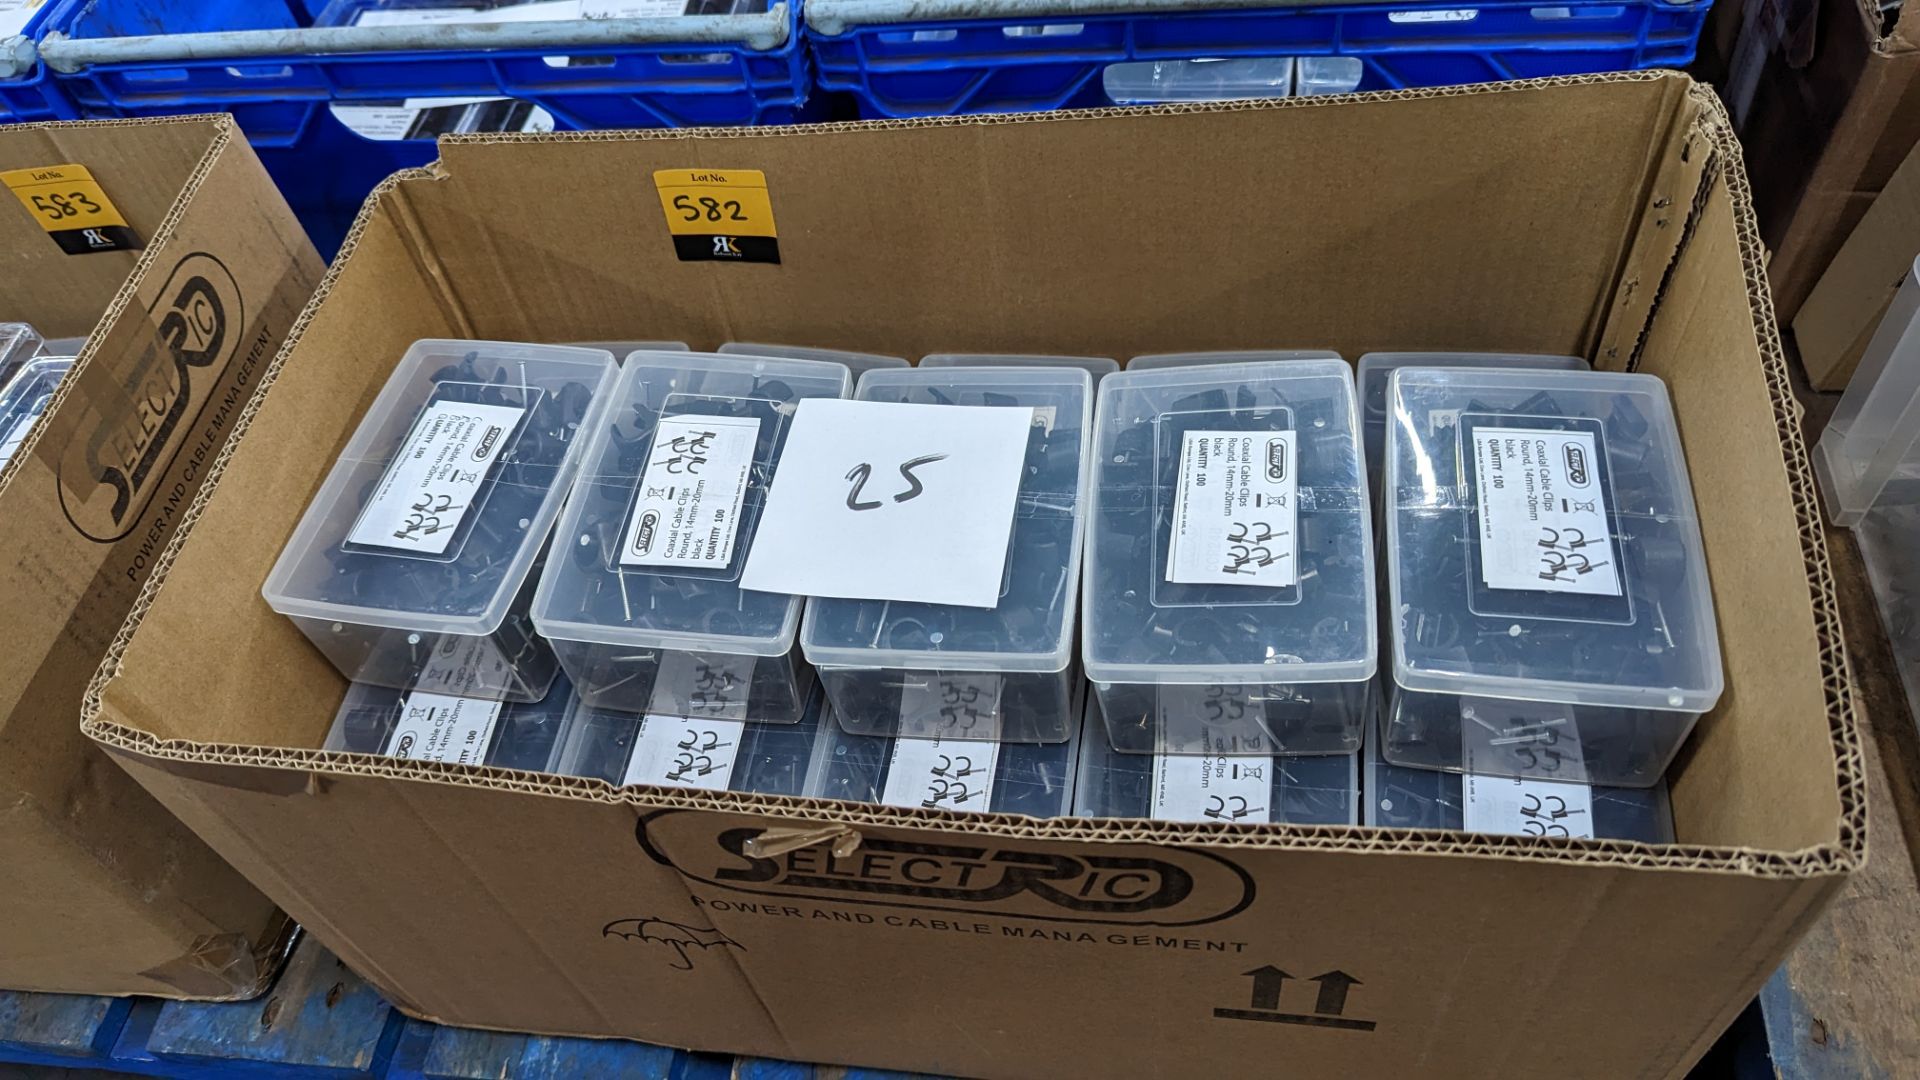 25 boxes of coaxial cable clips, each containing 100 clips